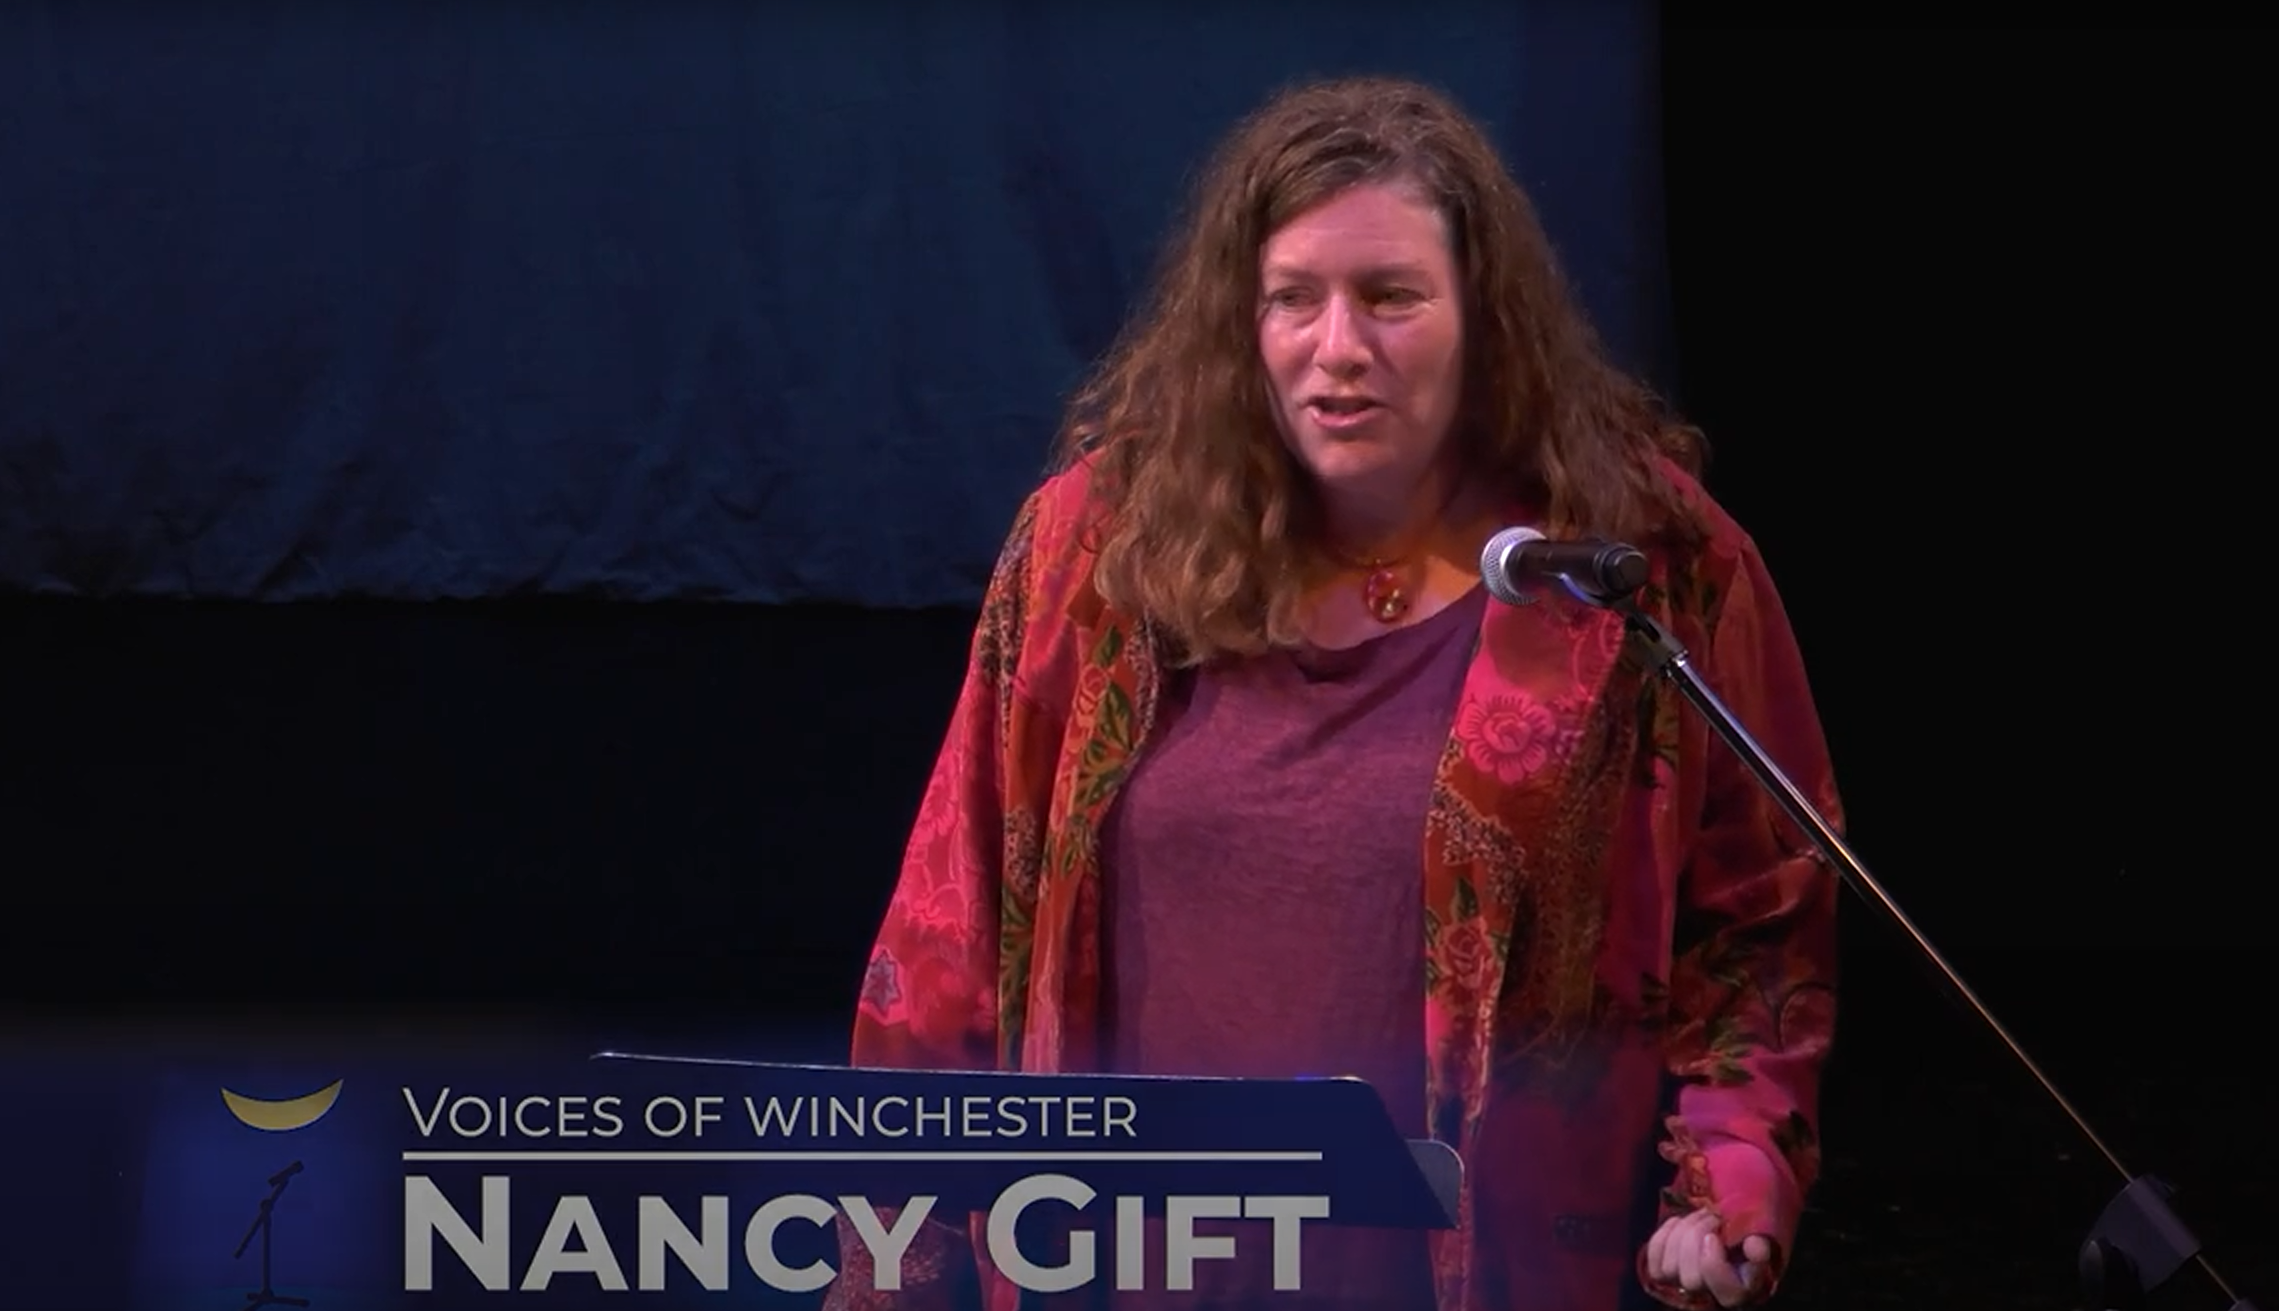 Nancy Gift speaks at the 2023 Voices of Winchester: A Night of Storytelling event.